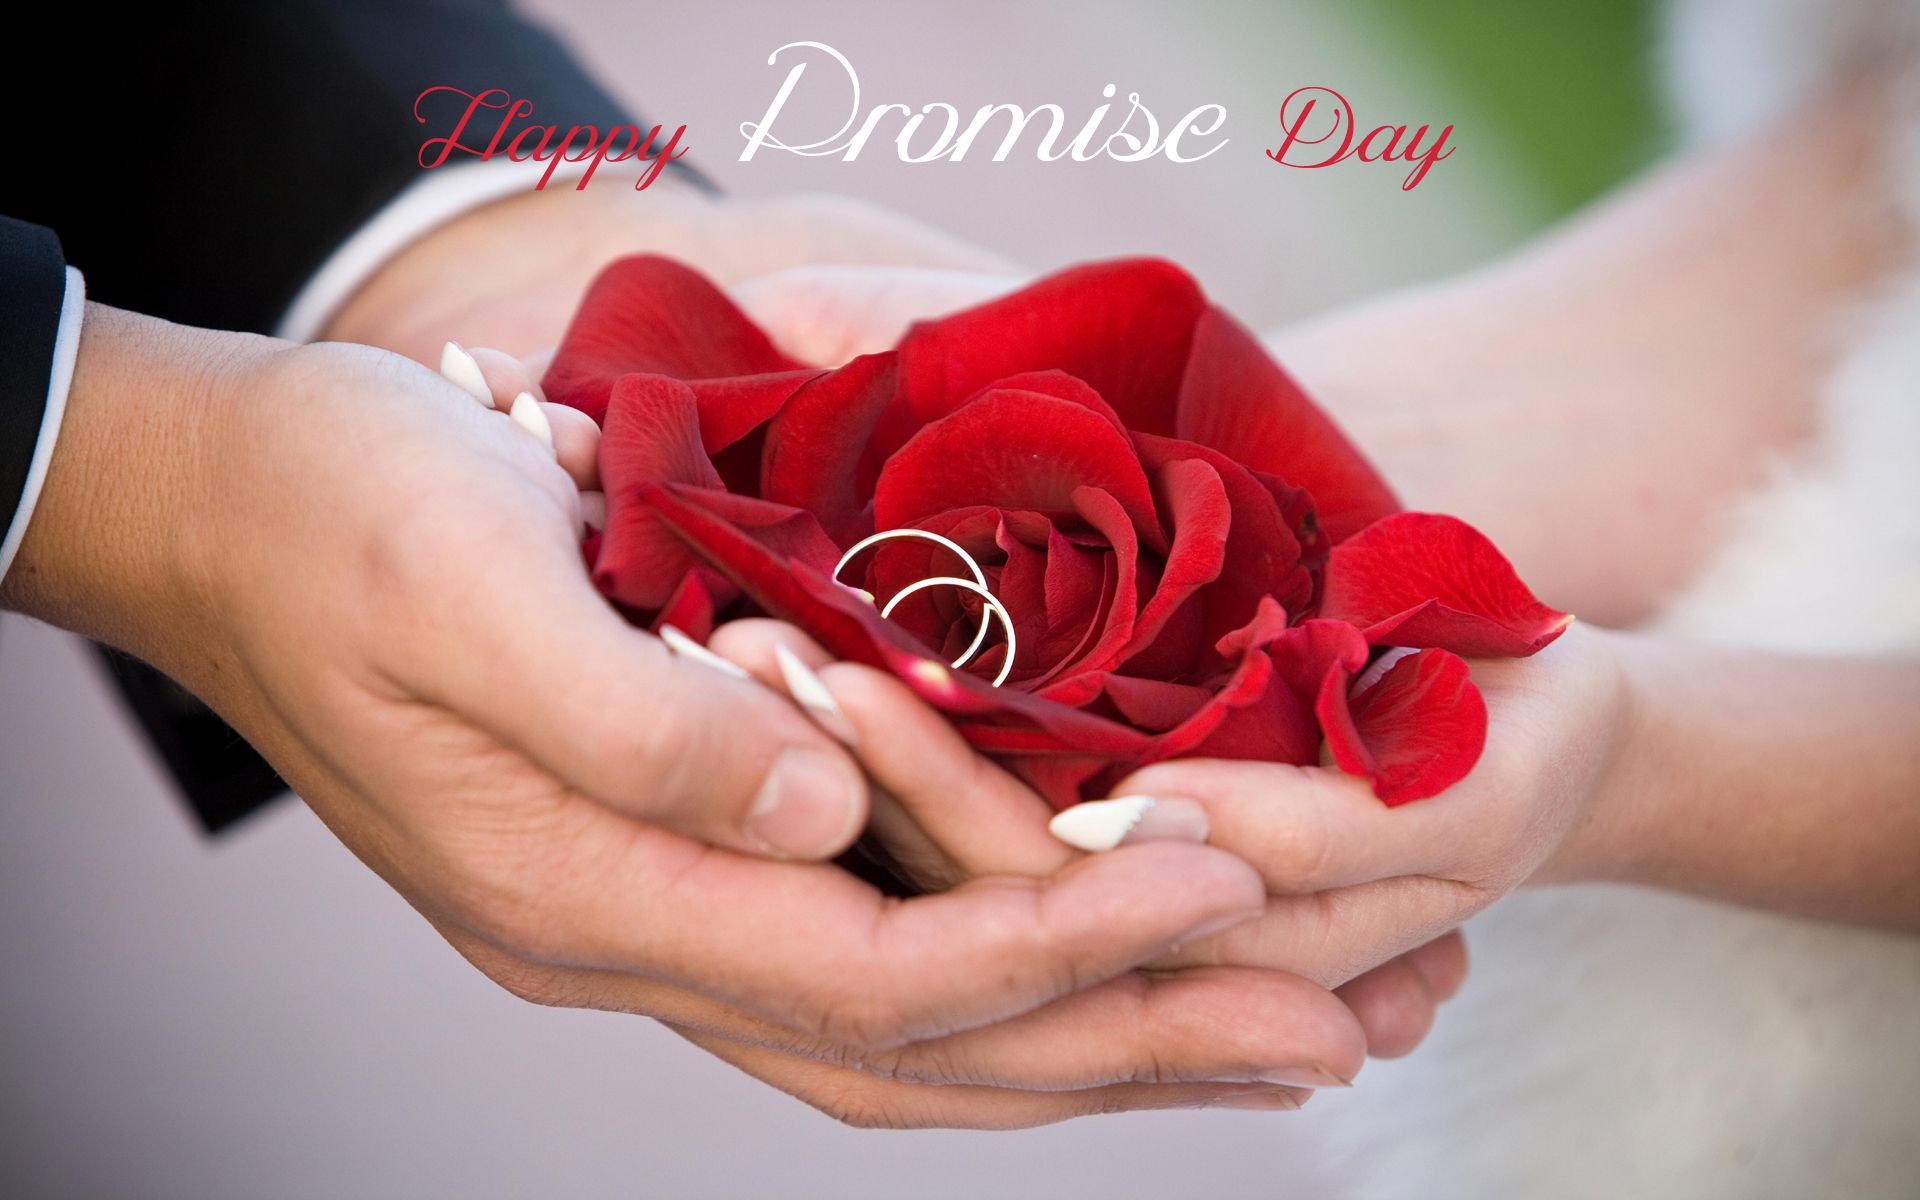 Download, Send, Promise Day Wishes, E-Greetings, Promise Day, Promise Day – 11 February, Happy Promise Day, Promise Day 2015, Rose in Hand